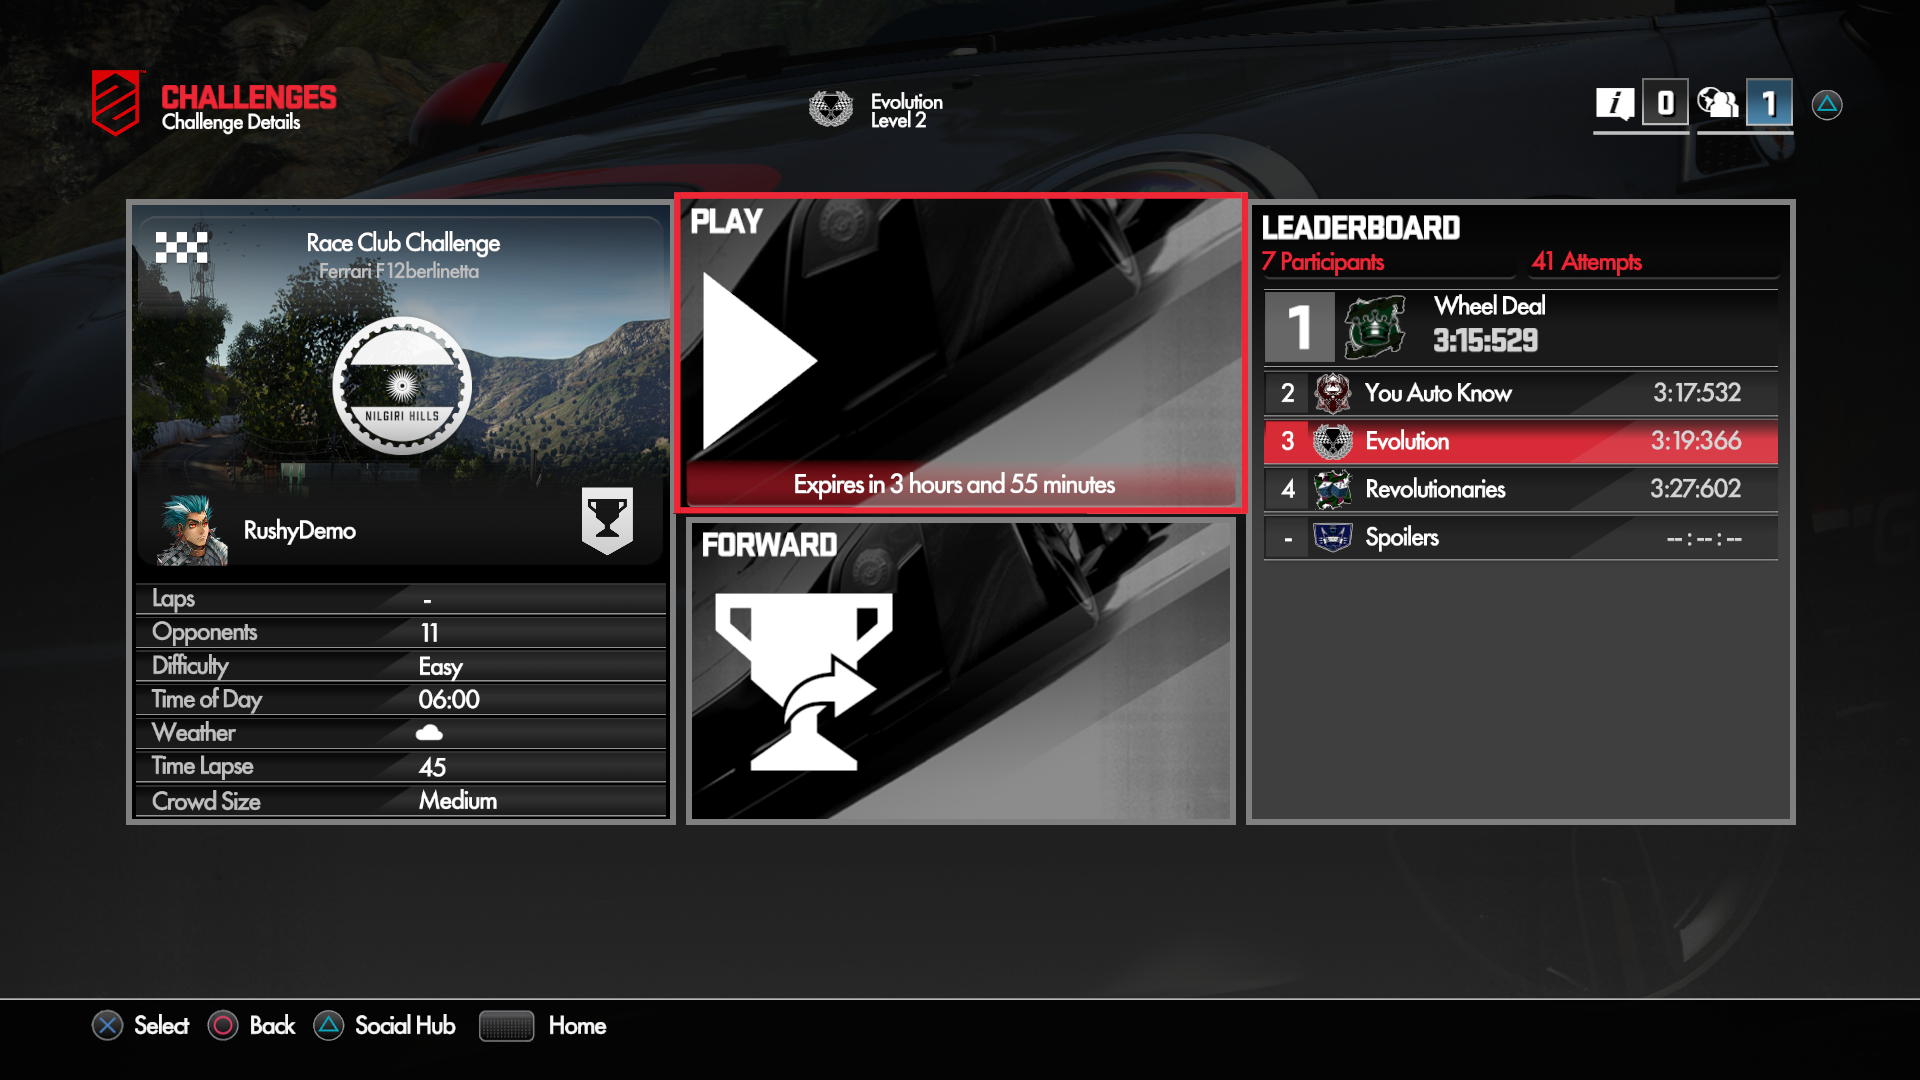 Evolution Doesn't Want Players to use DriveClub's Micro-Transactions